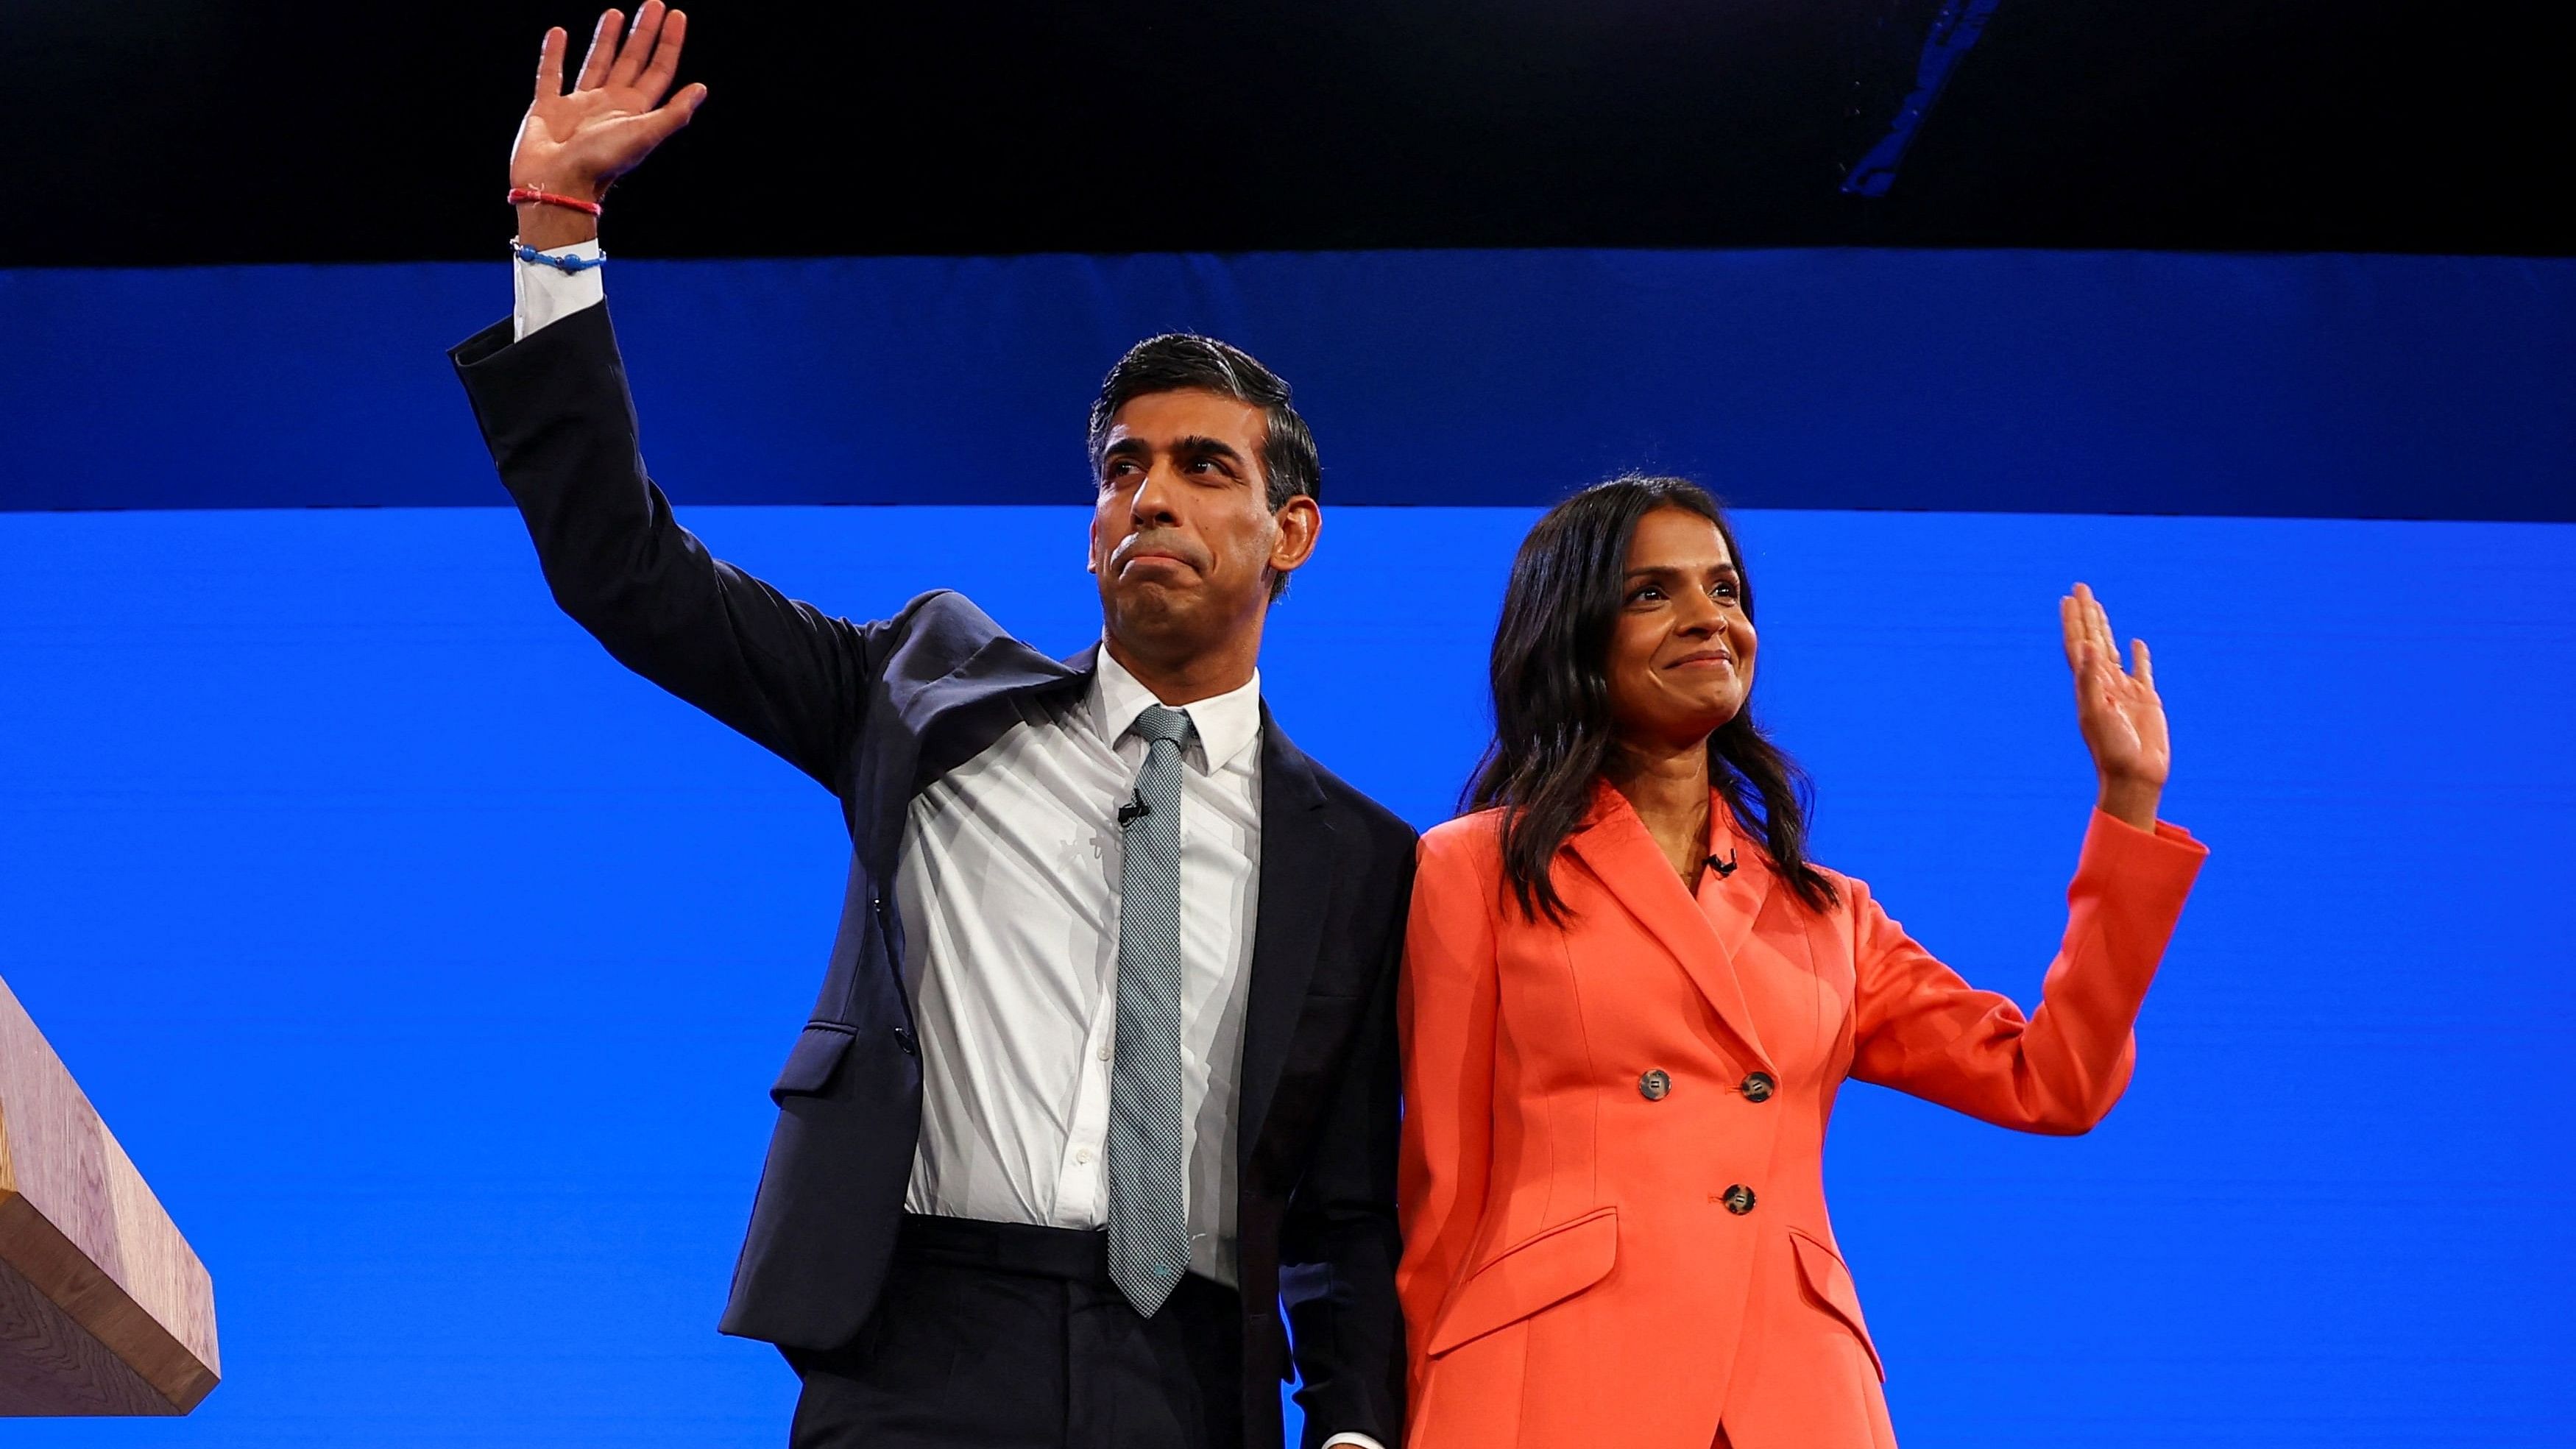 <div class="paragraphs"><p>British Prime Minister Rishi Sunak and his wife Akshata Murty greet people on stage, at Britain's Conservative Party's annual conference in Manchester.</p></div>